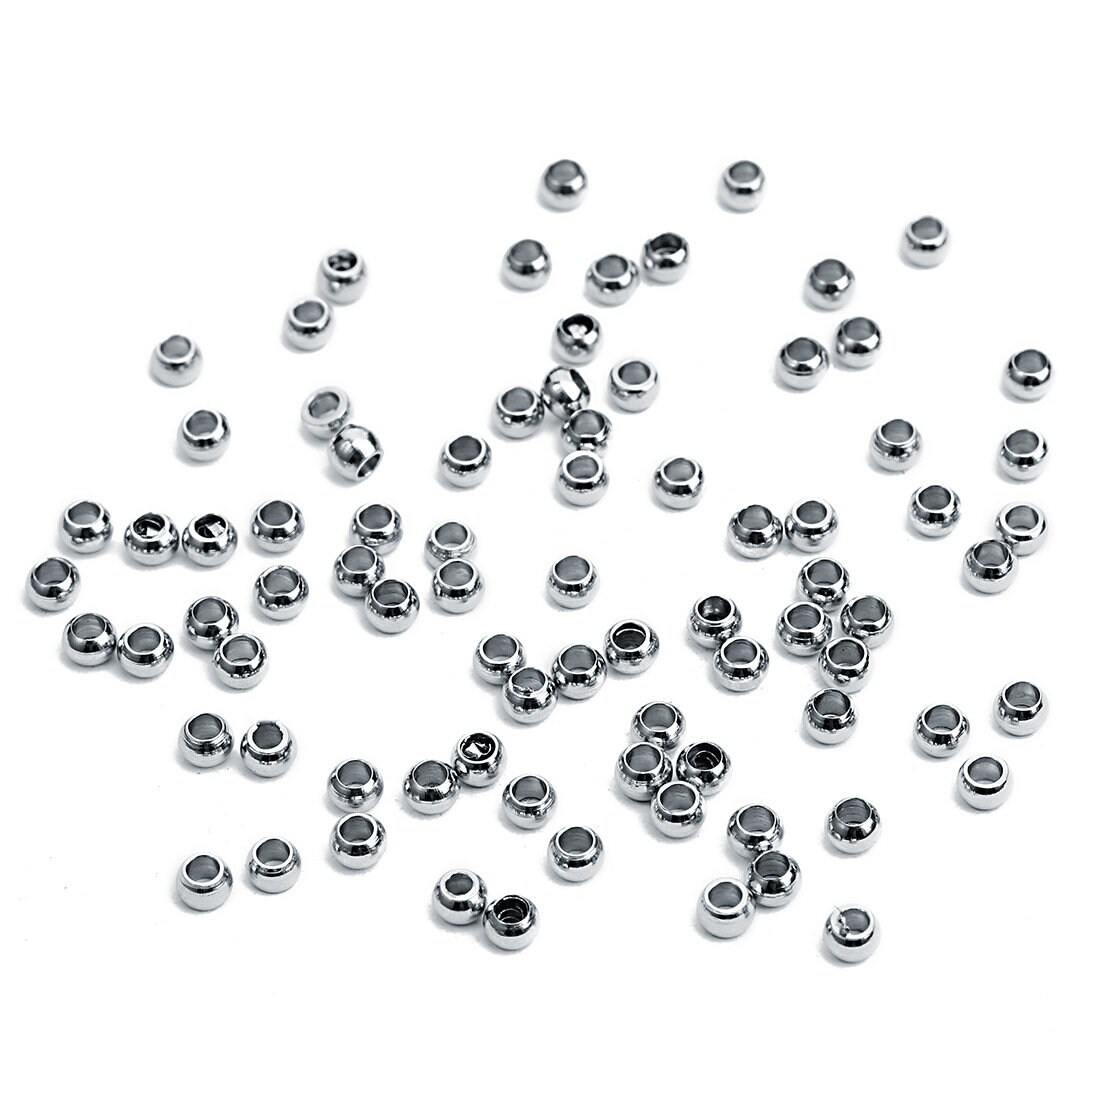 1Box/500pcs Tiny Round Metal Beads With 1mm Small Hole Ball Spacer Beads  Stainless Steel Bead 3mm Dia Loose Beads Metal Spacers For Jewelry Making  Fin